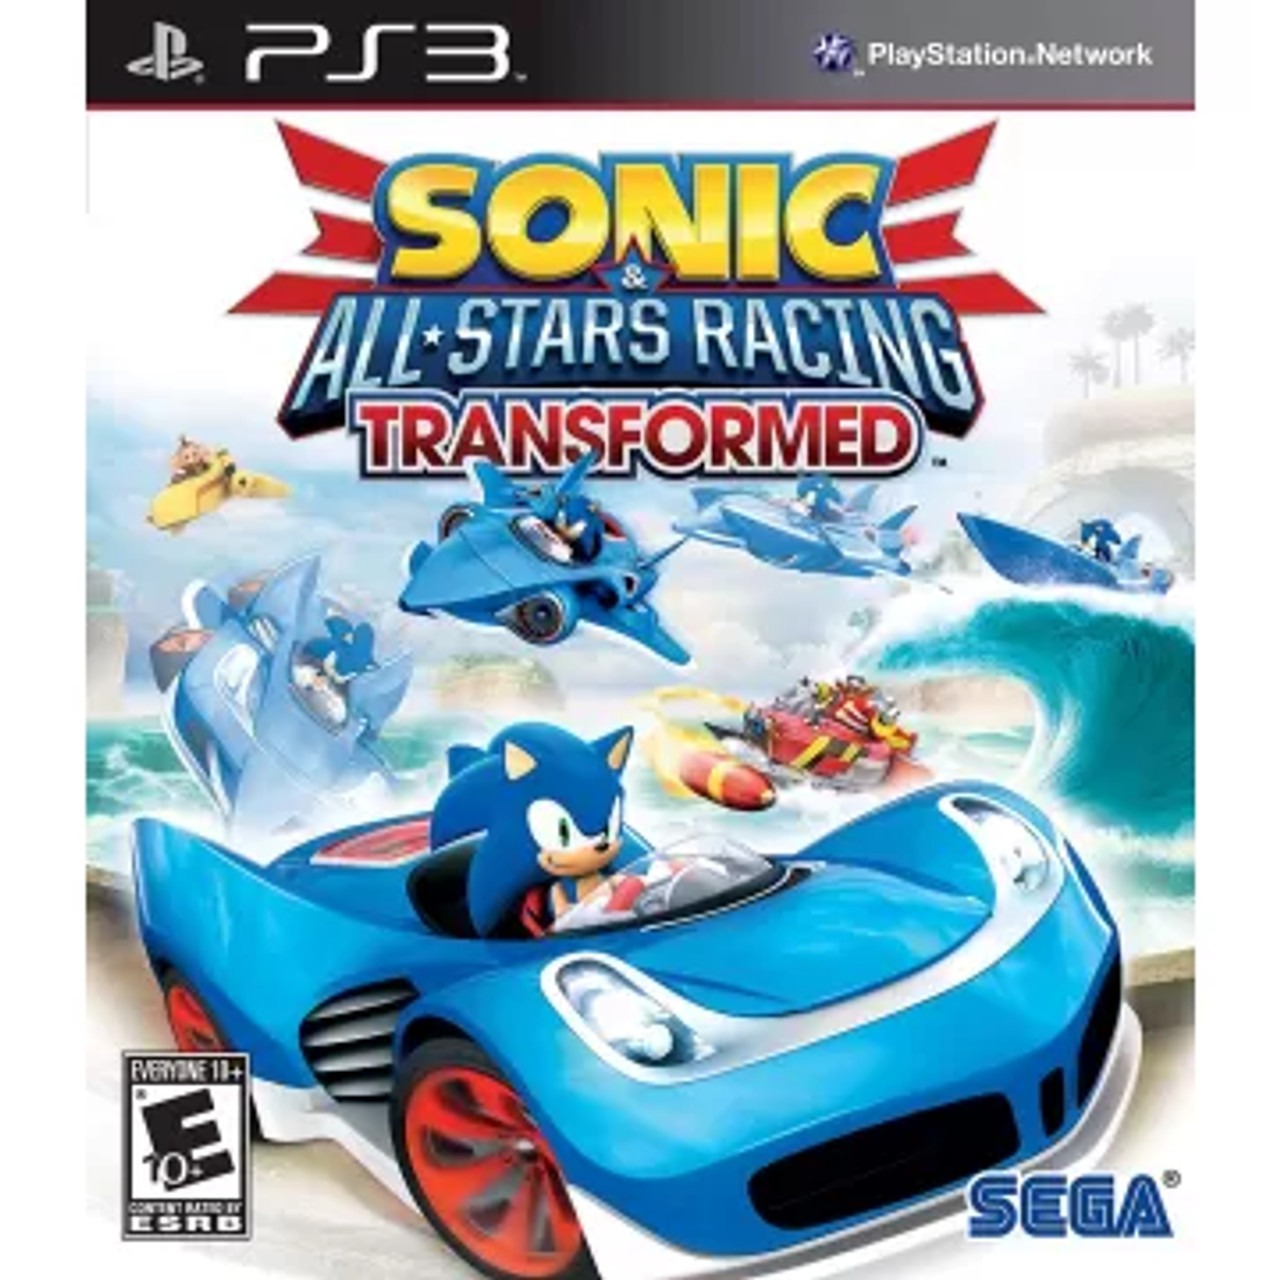 Sonic All-Stars Racing Transformed for Playstation 3 available at Videogamesnewyork, NY